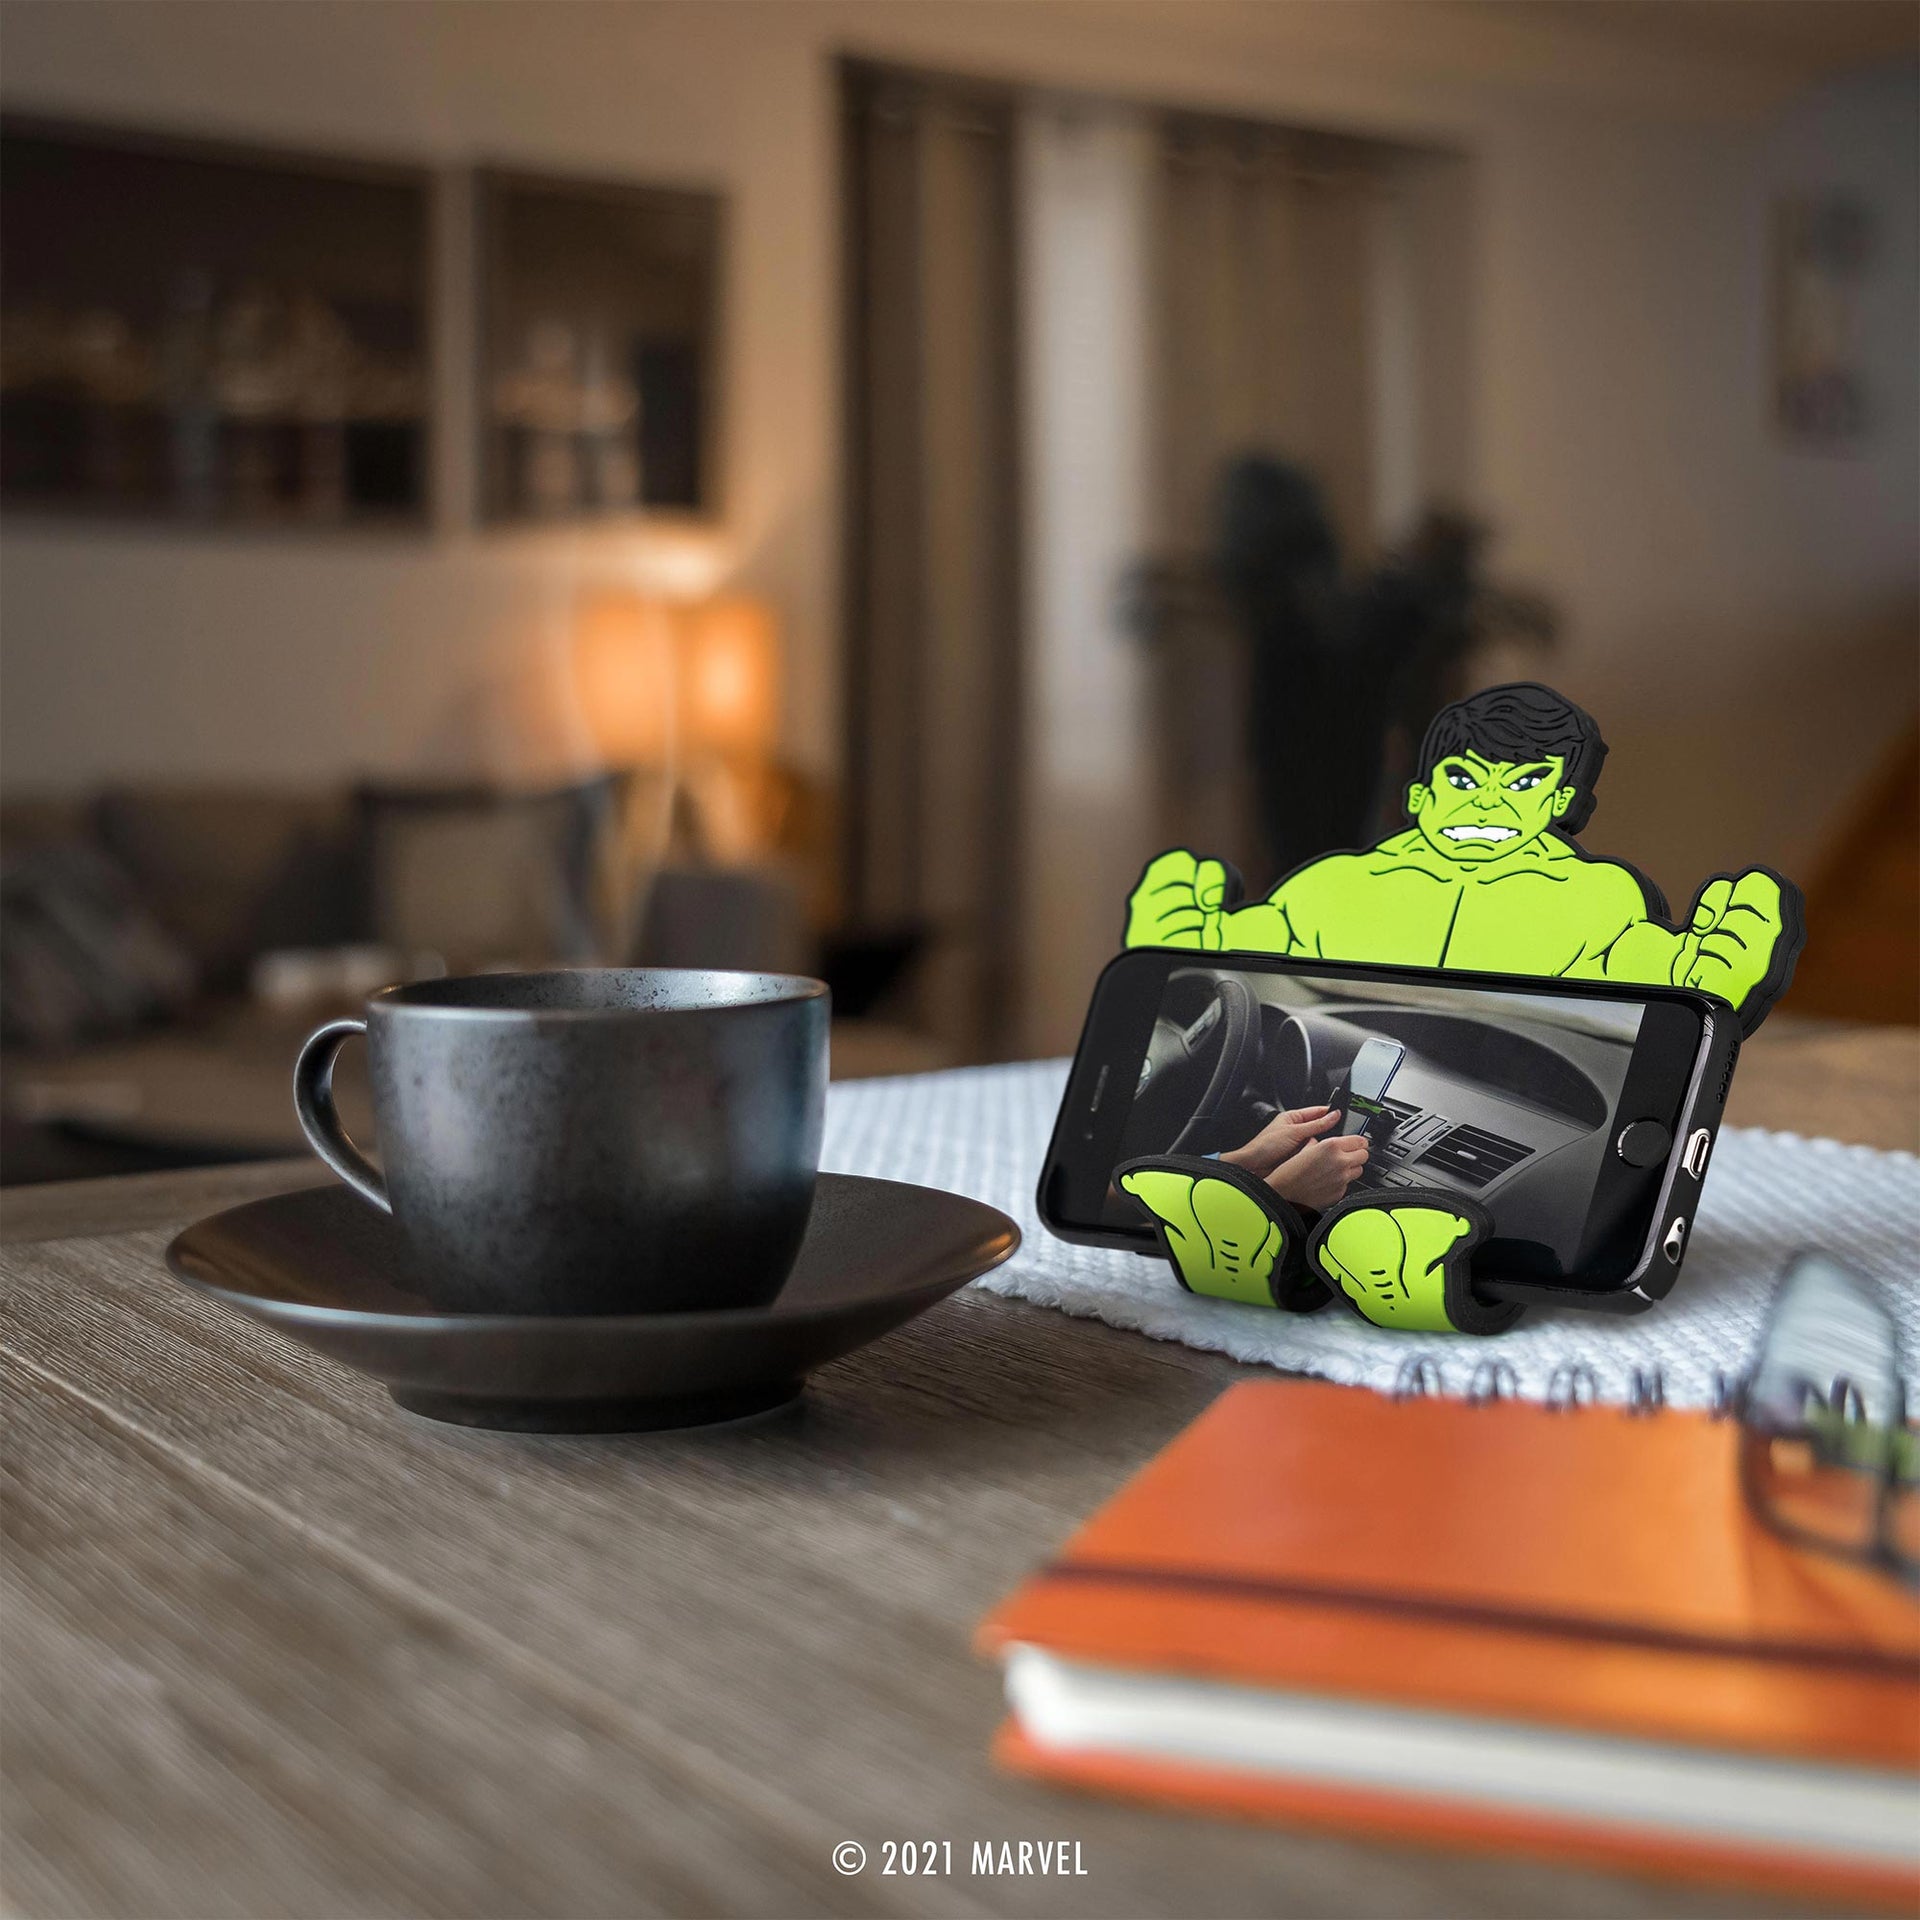 Image of Marvel Comics Hulk Hug Buddy holding a cell phone beside a cup of coffee while sitting on a kitchen table